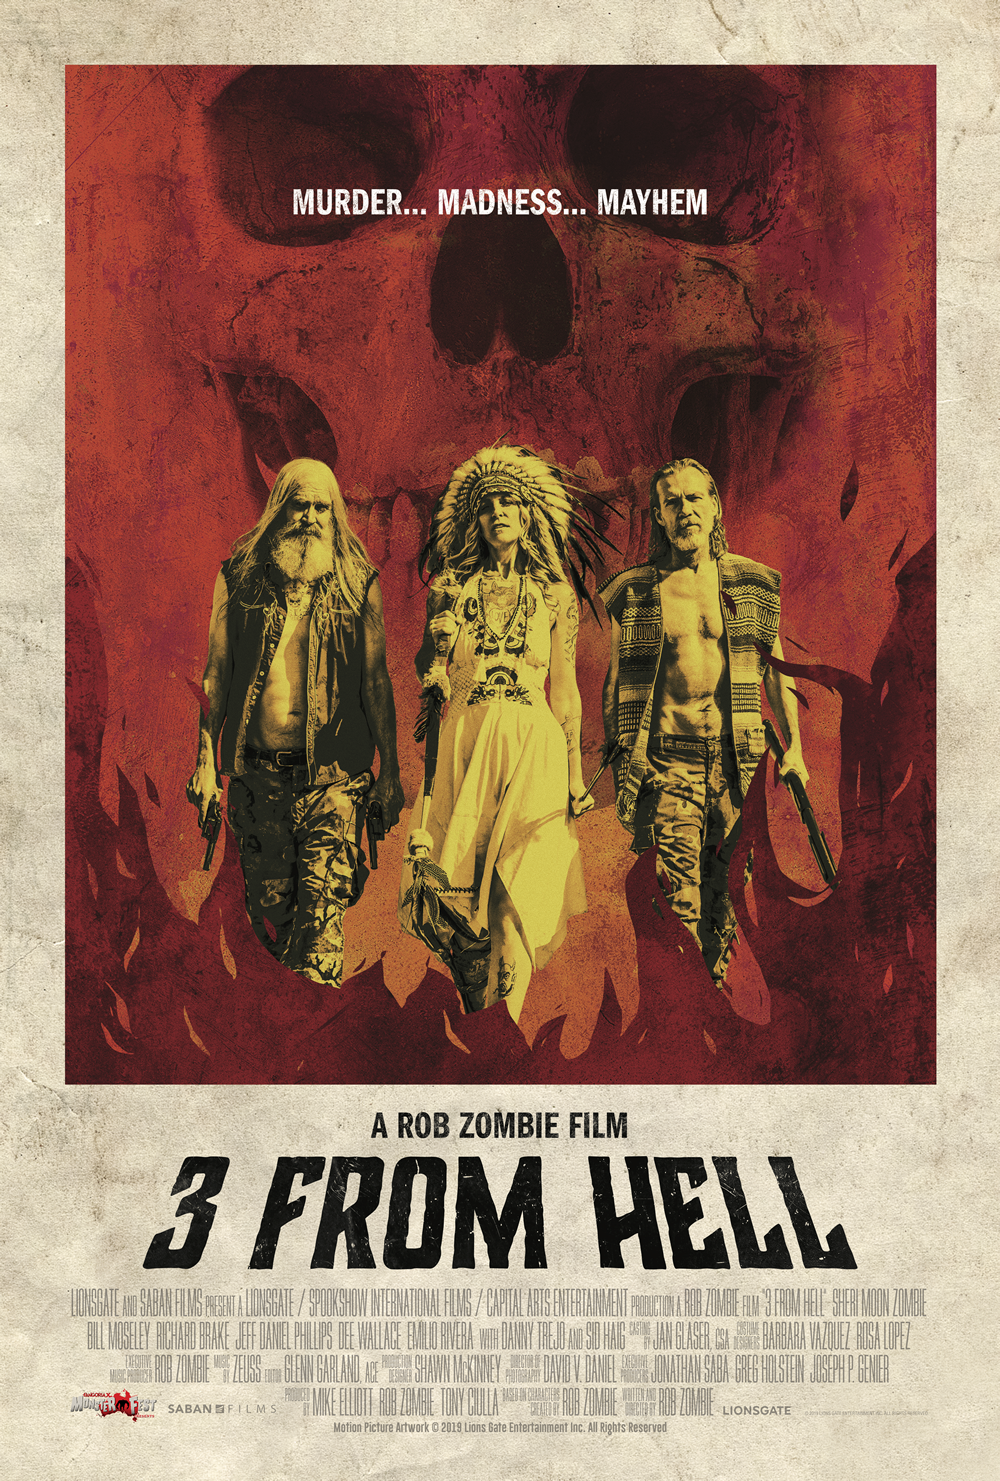 3 From Hell - Poster (Small)